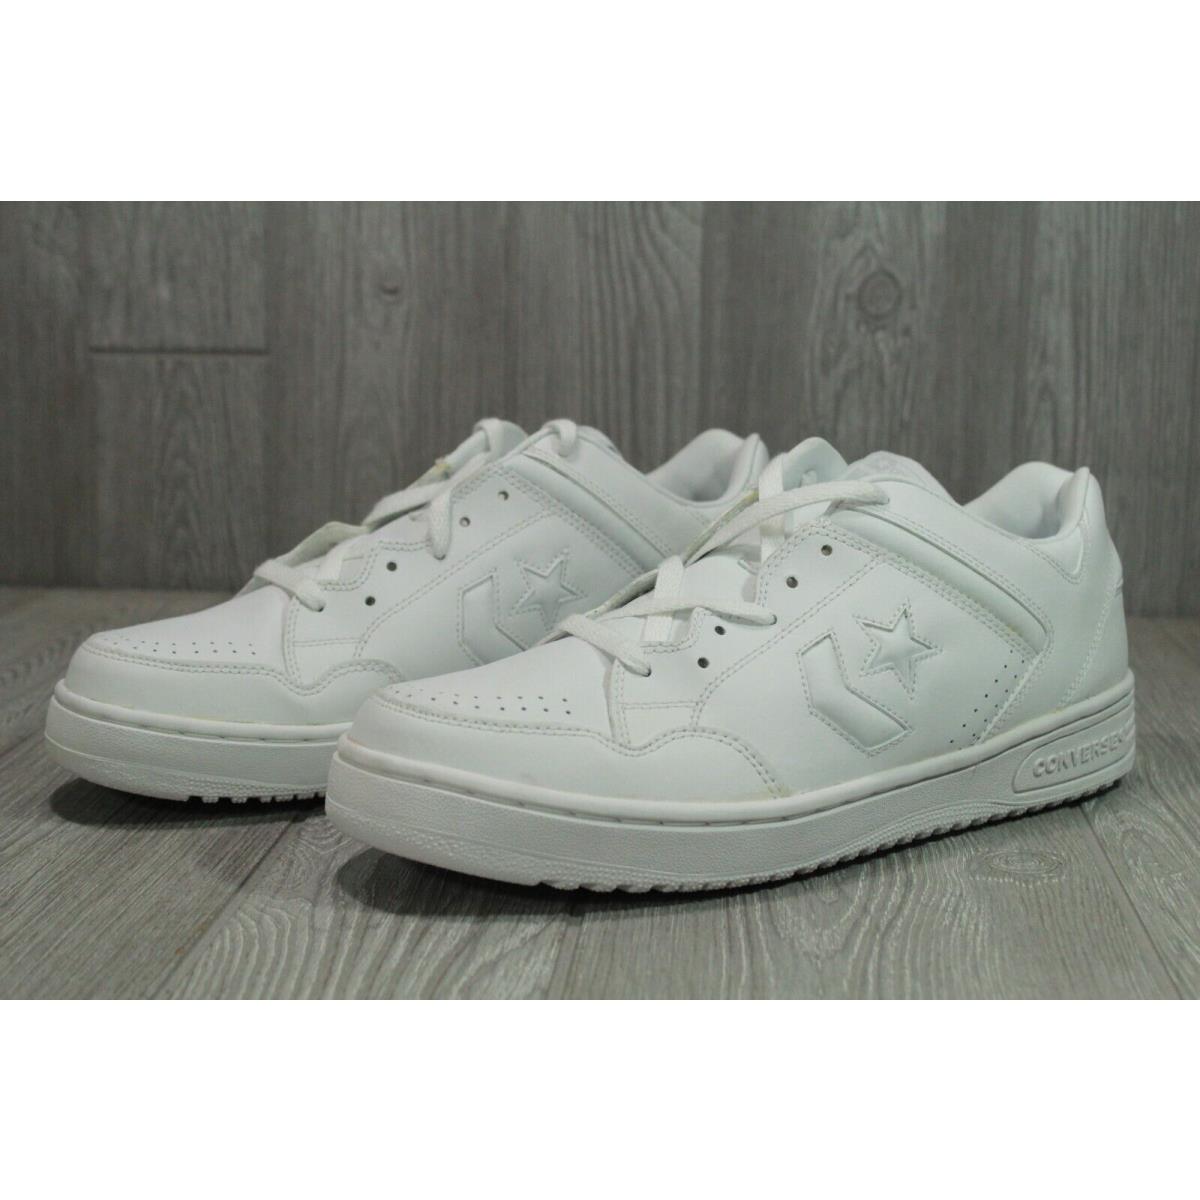 Converse shoes Weapon - White 0